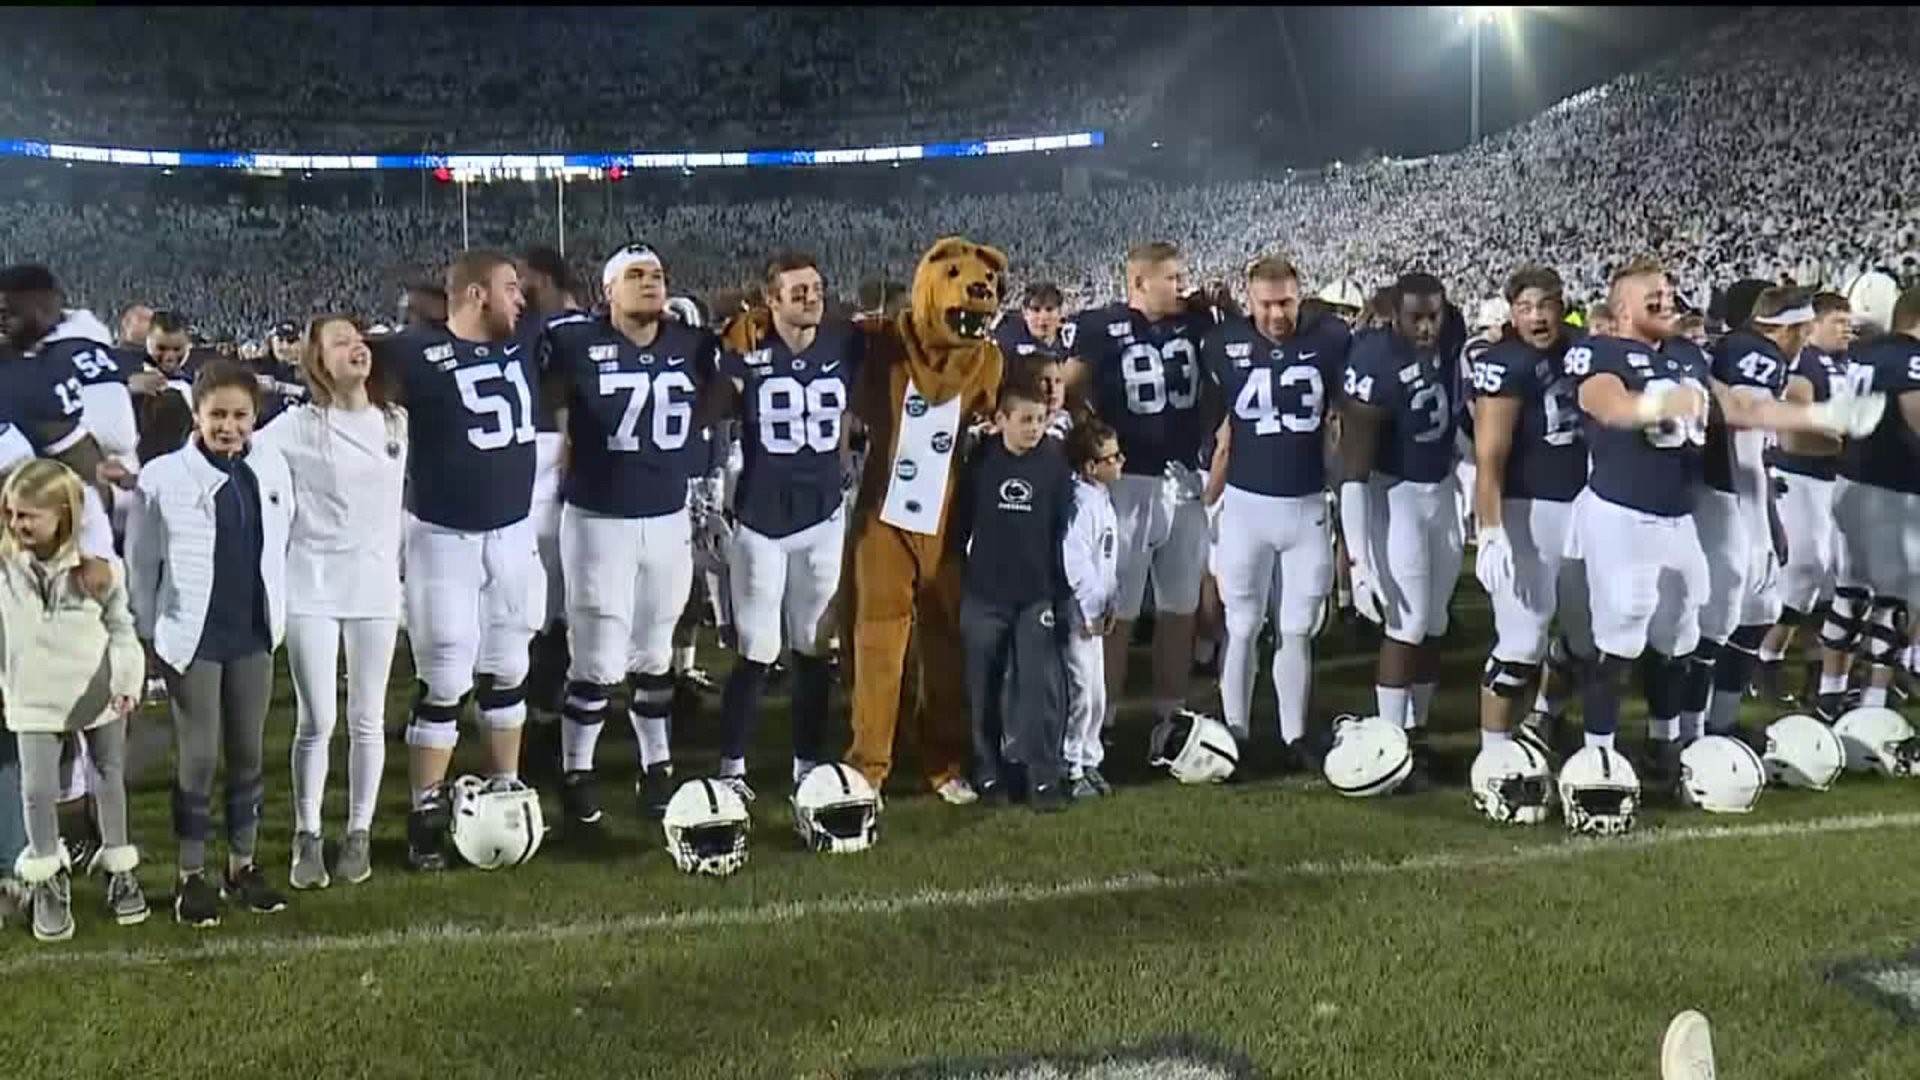 Former Penn State Football Player Accuses Ex-Teammates of Hazing, Coach Franklin of Retaliation